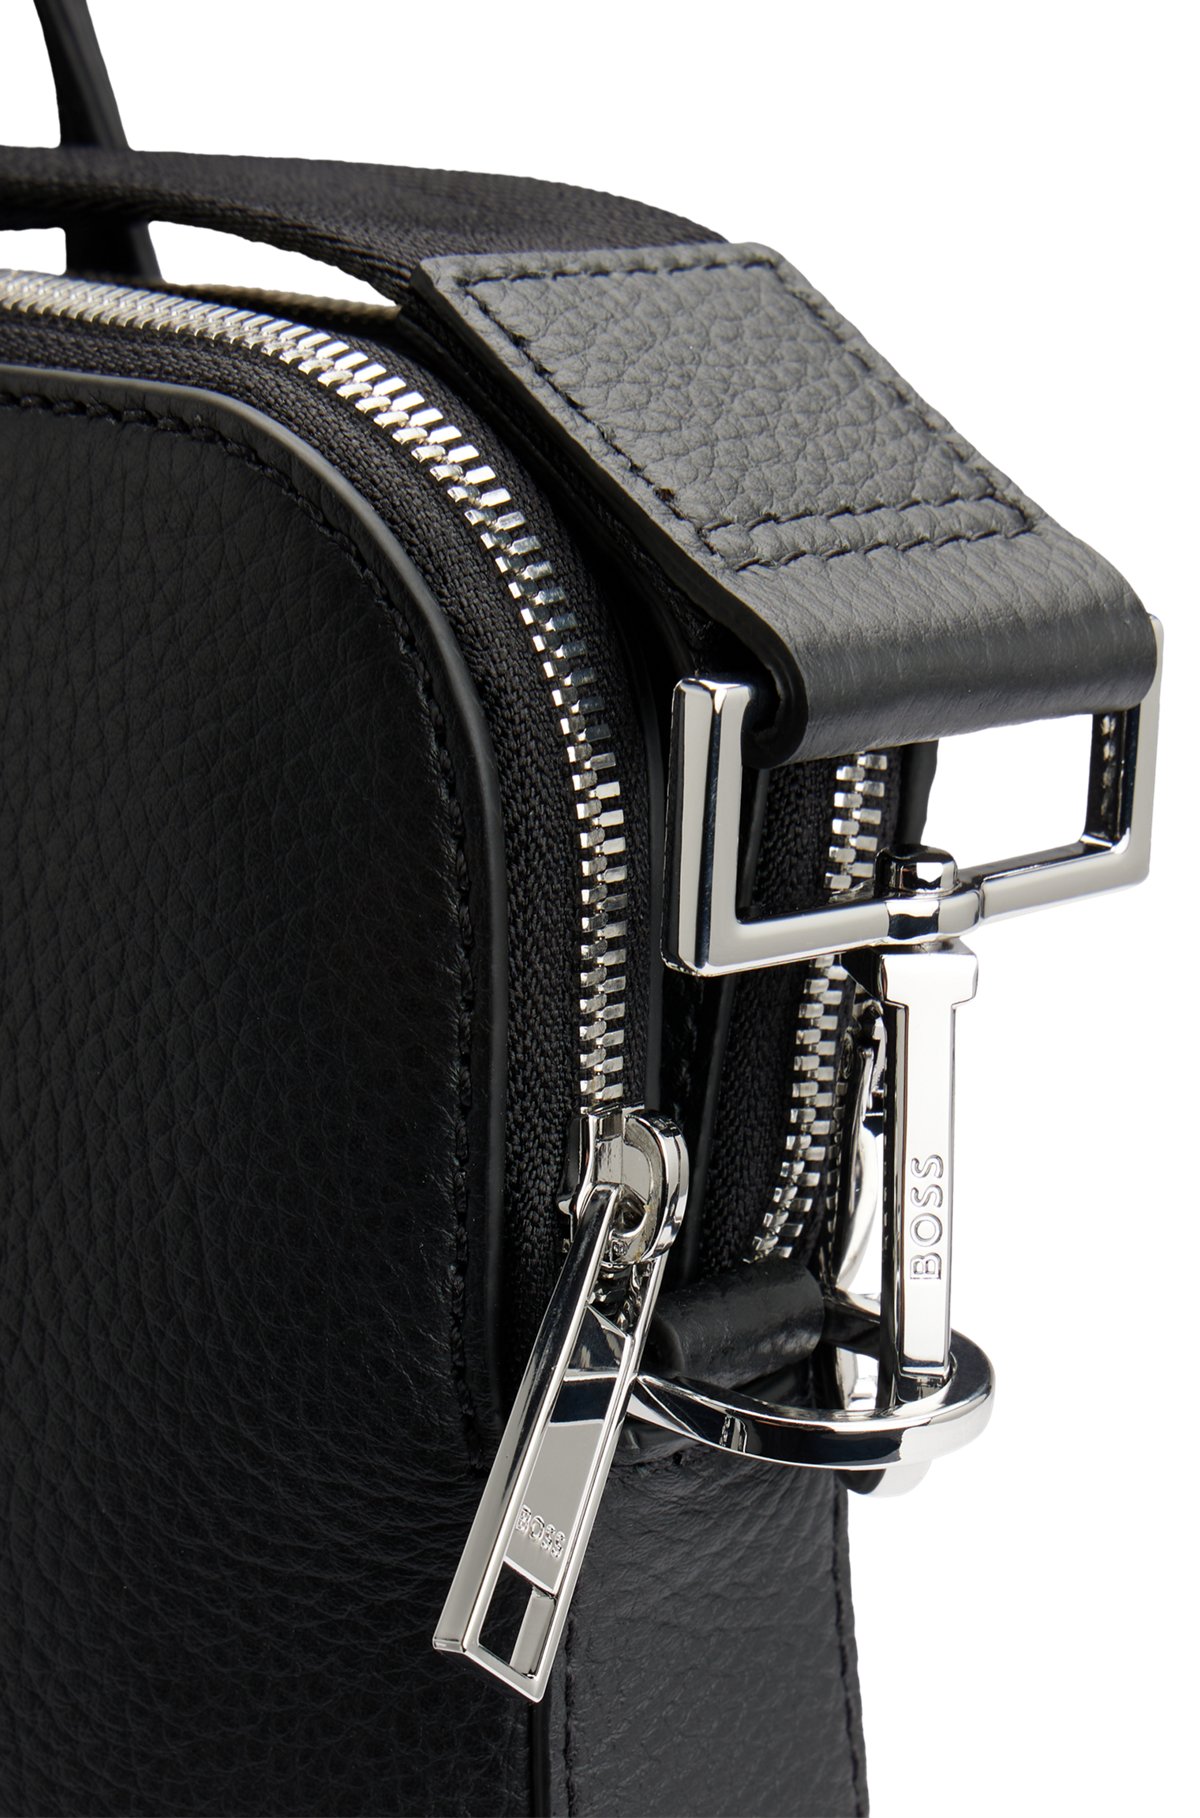 Zipped document case in Italian leather with embossed logo, Black